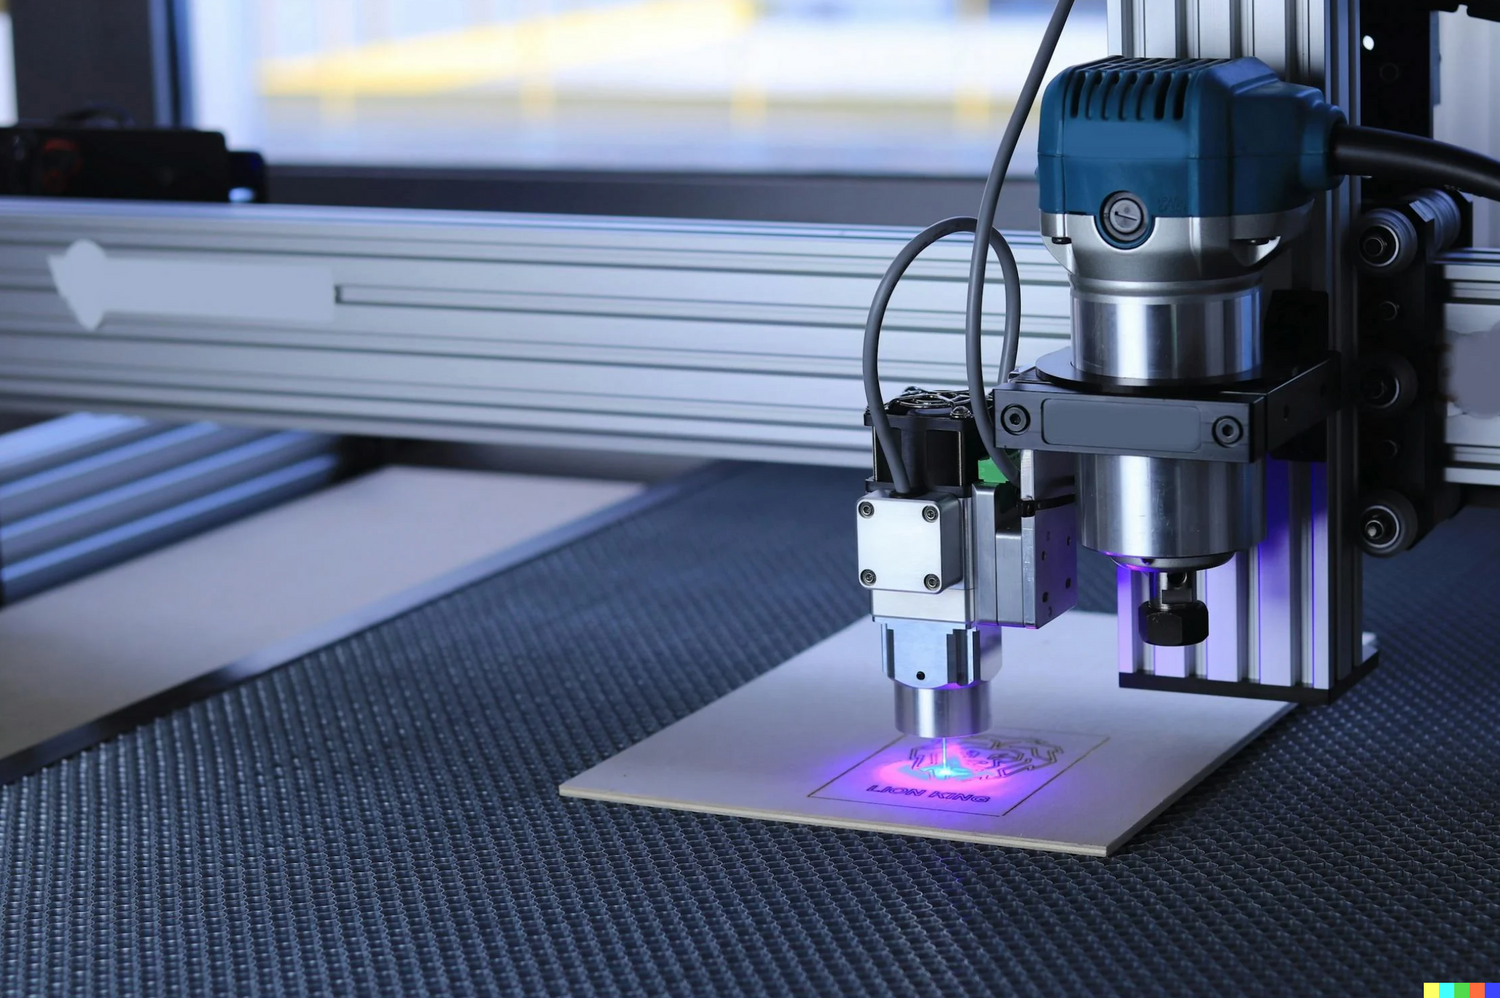 A laser cutter with a blue and black motor, equipped with a laser engraving module, is in the process of engraving a design onto a piece of material placed on the machine’s bed. The bright purple light emanates from the point where the laser contacts the material, indicating the engraving process. Various cables are connected to the motor and laser module, showing electrical connections.